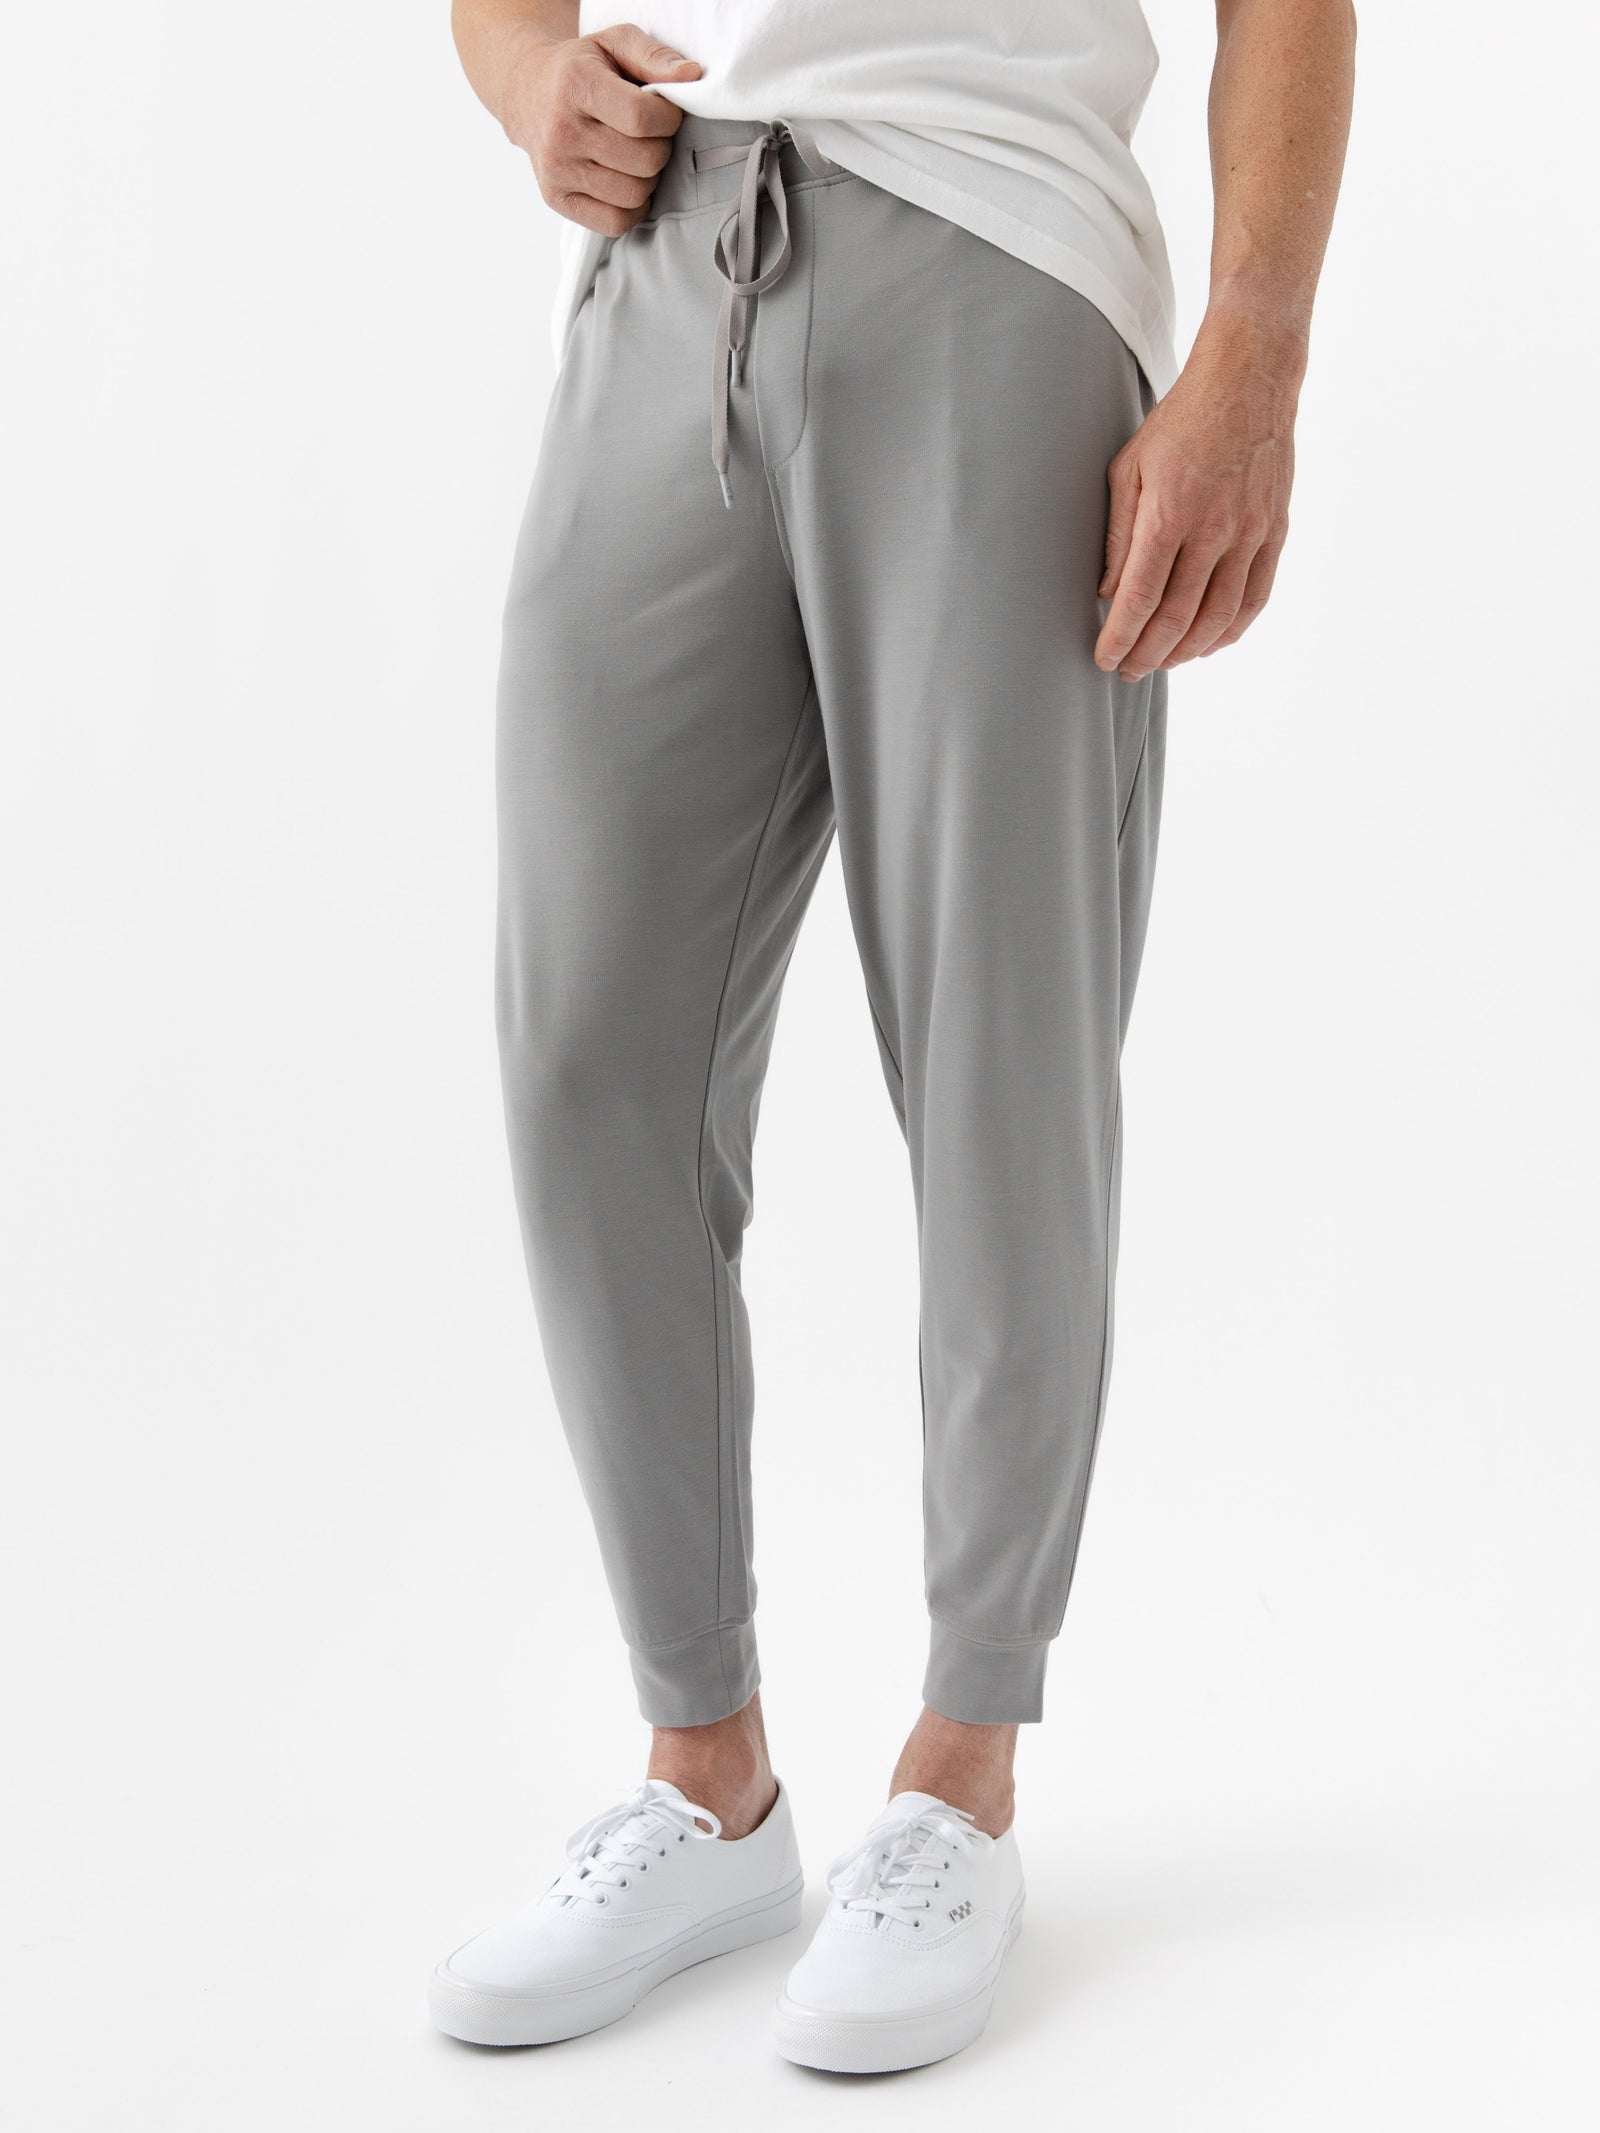 Wholesale jogger set women for Sleep and Well-Being –